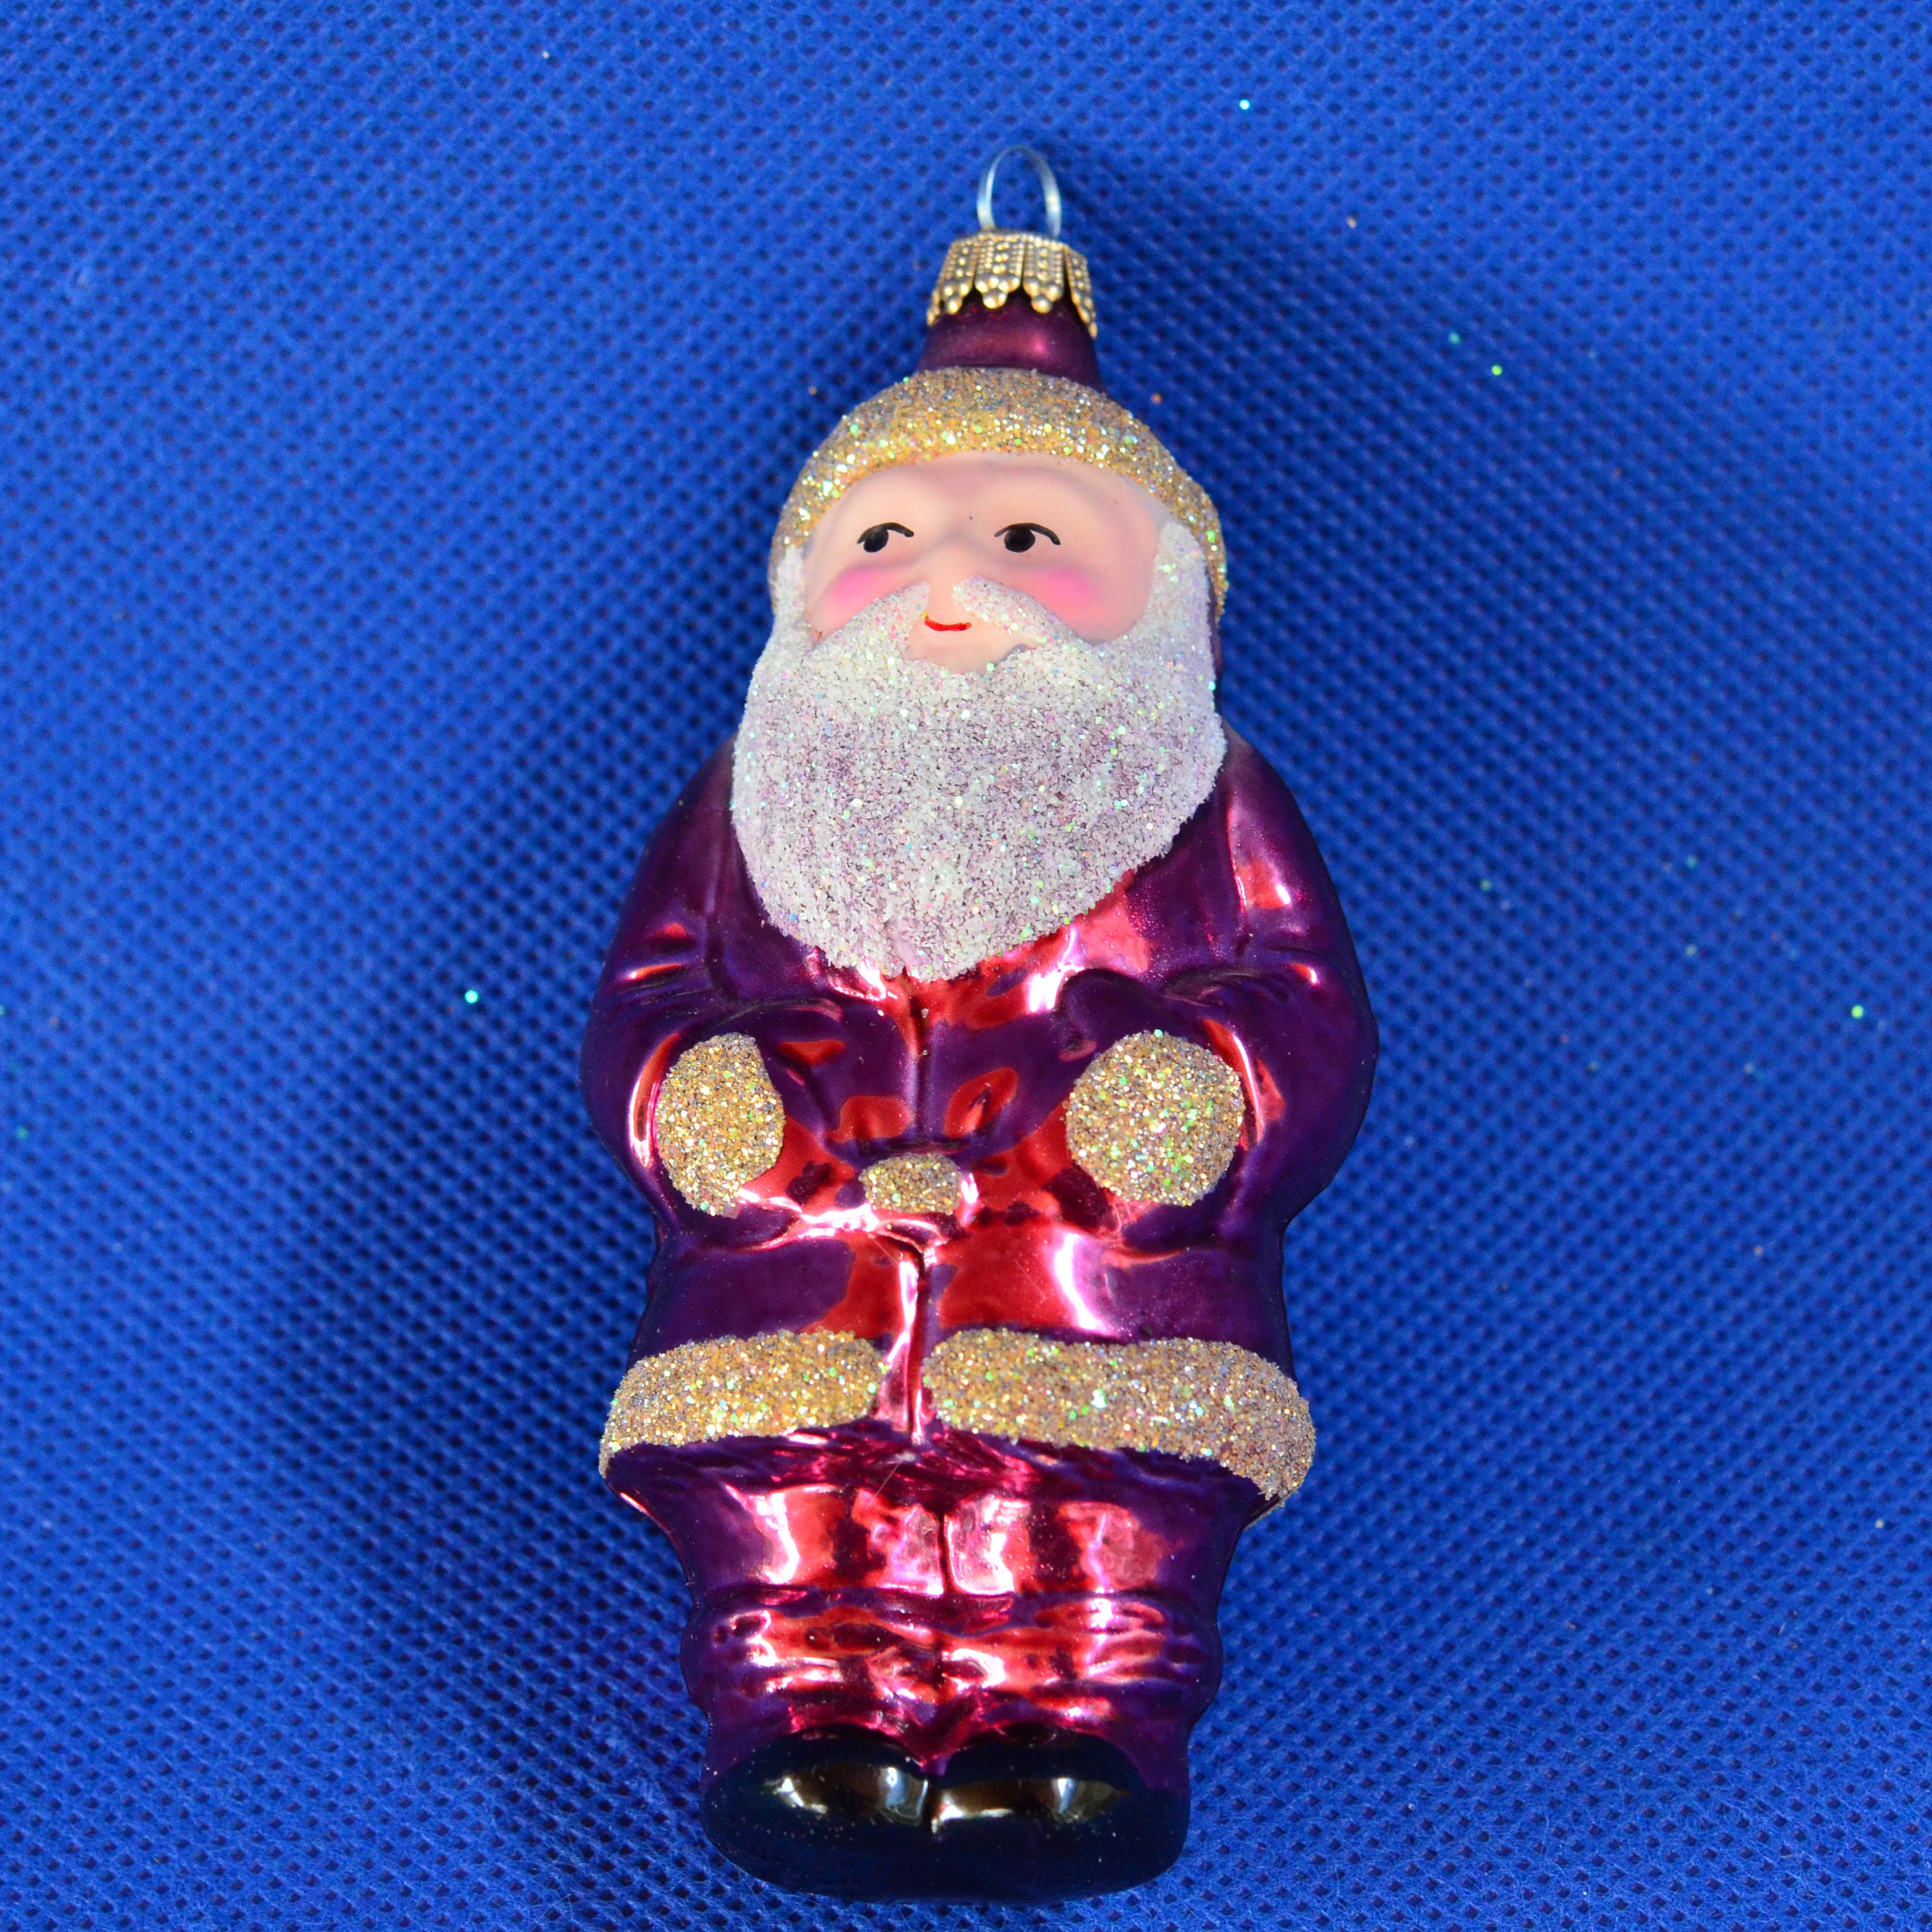 Décor Christmas Made Germany Hand Glitter Ornament West Glass Etsy Santa Lauscha Box Krebs Decorated Sparkle - Holiday in Blown Original